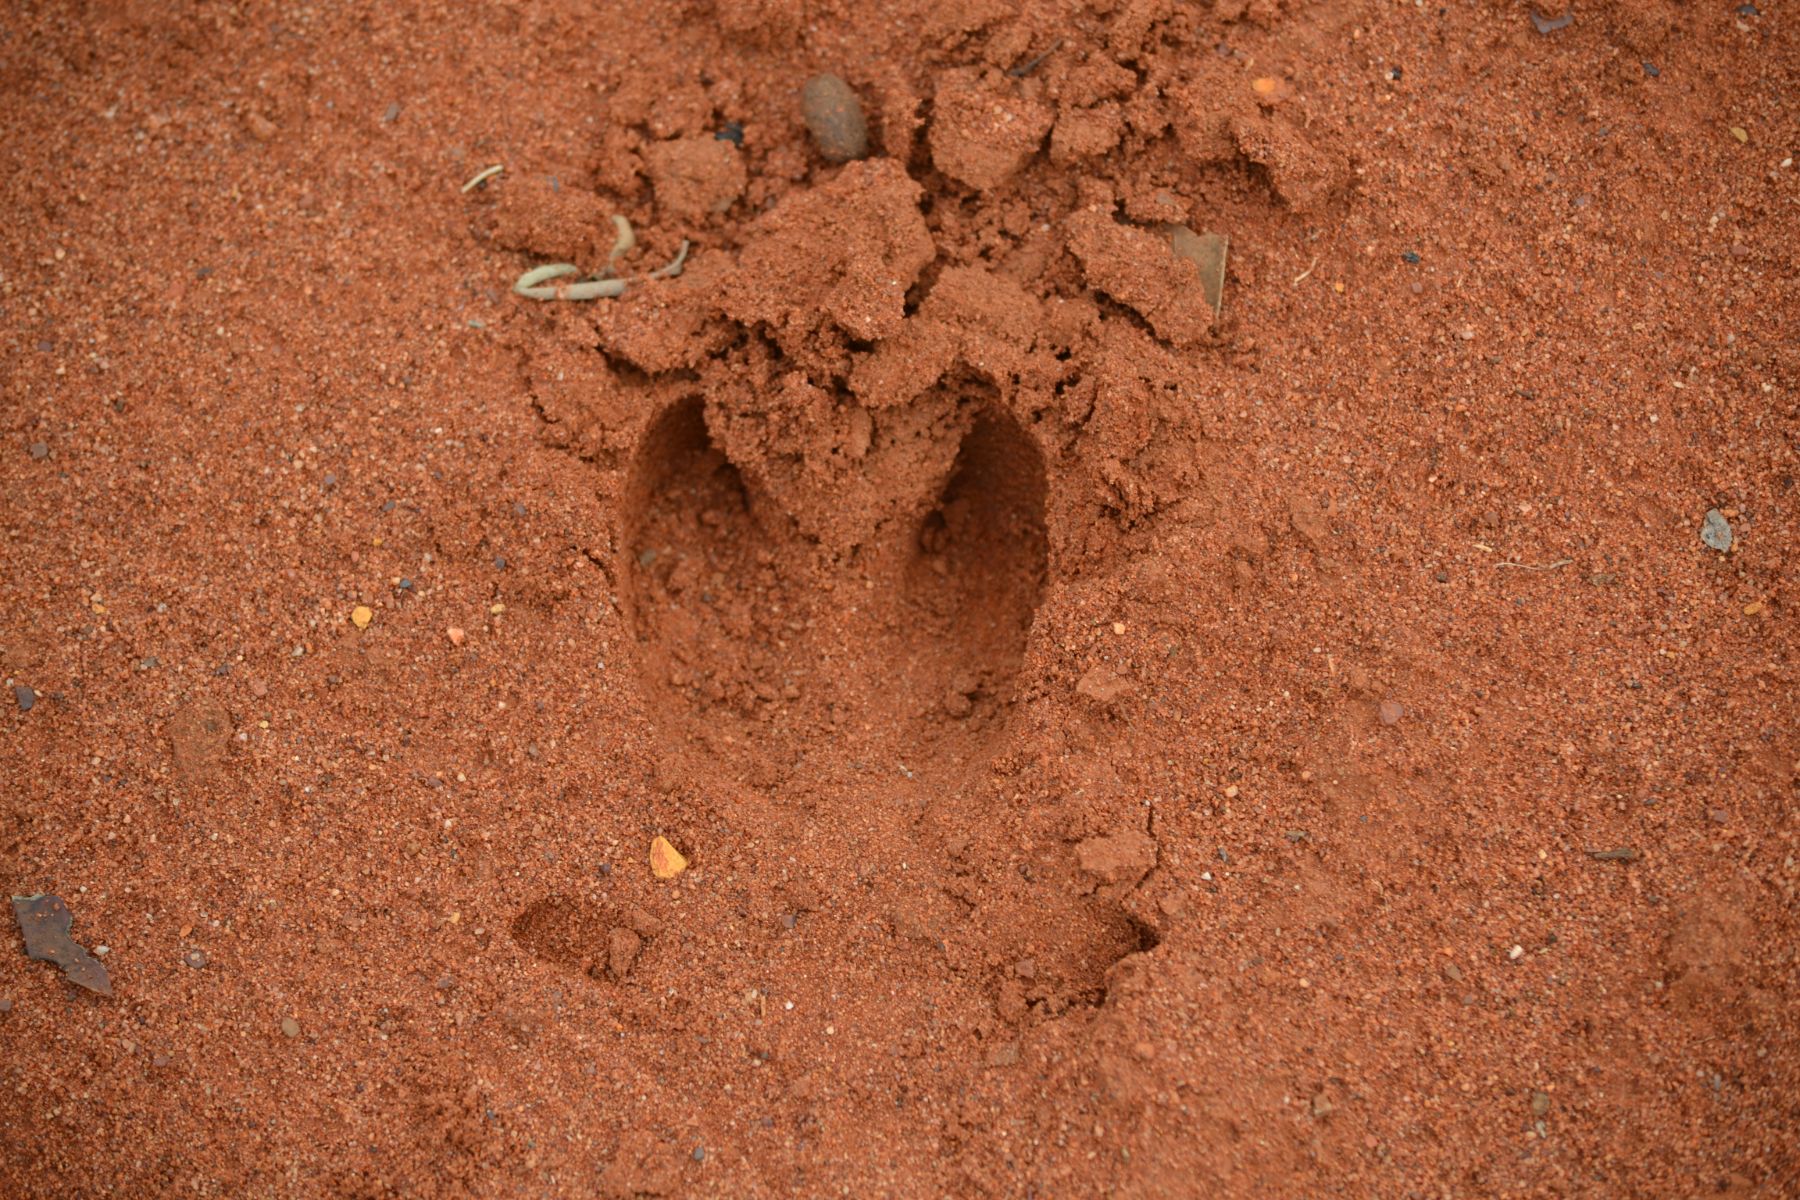 Feral pig print in soft sand with dew claw impressions at the rear of the print.